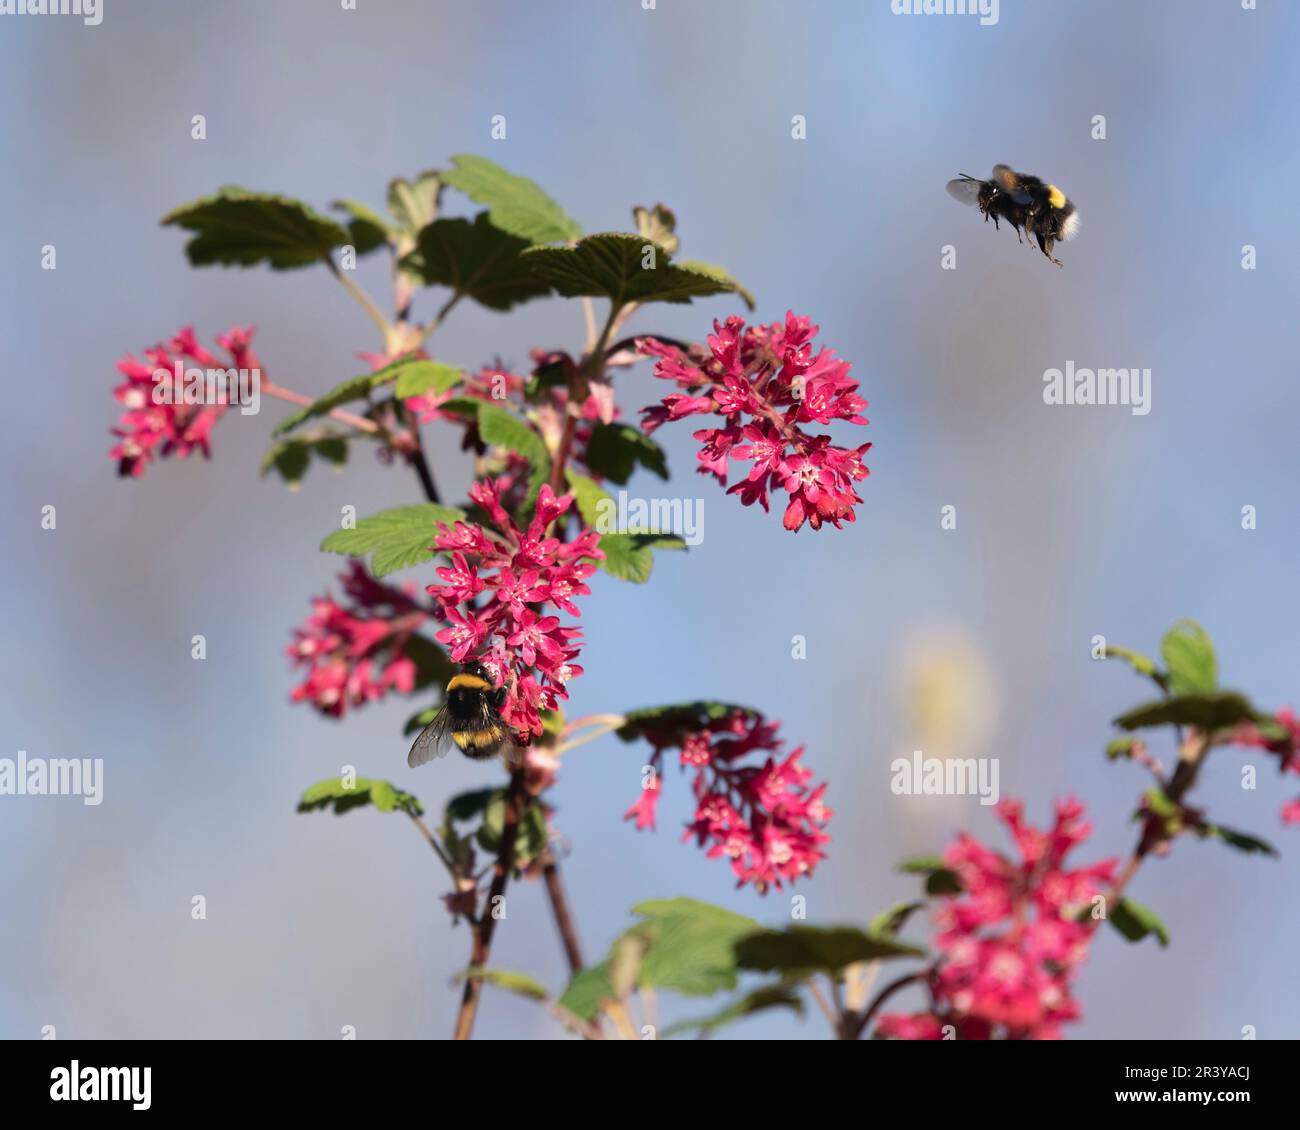 A White-tailed Bumblebee (Bombus Lucorum) Flying Towards the Reddish-pink Flowers of Red Flower Currant (Ribes Sanguineum) in Spring Stock Photo